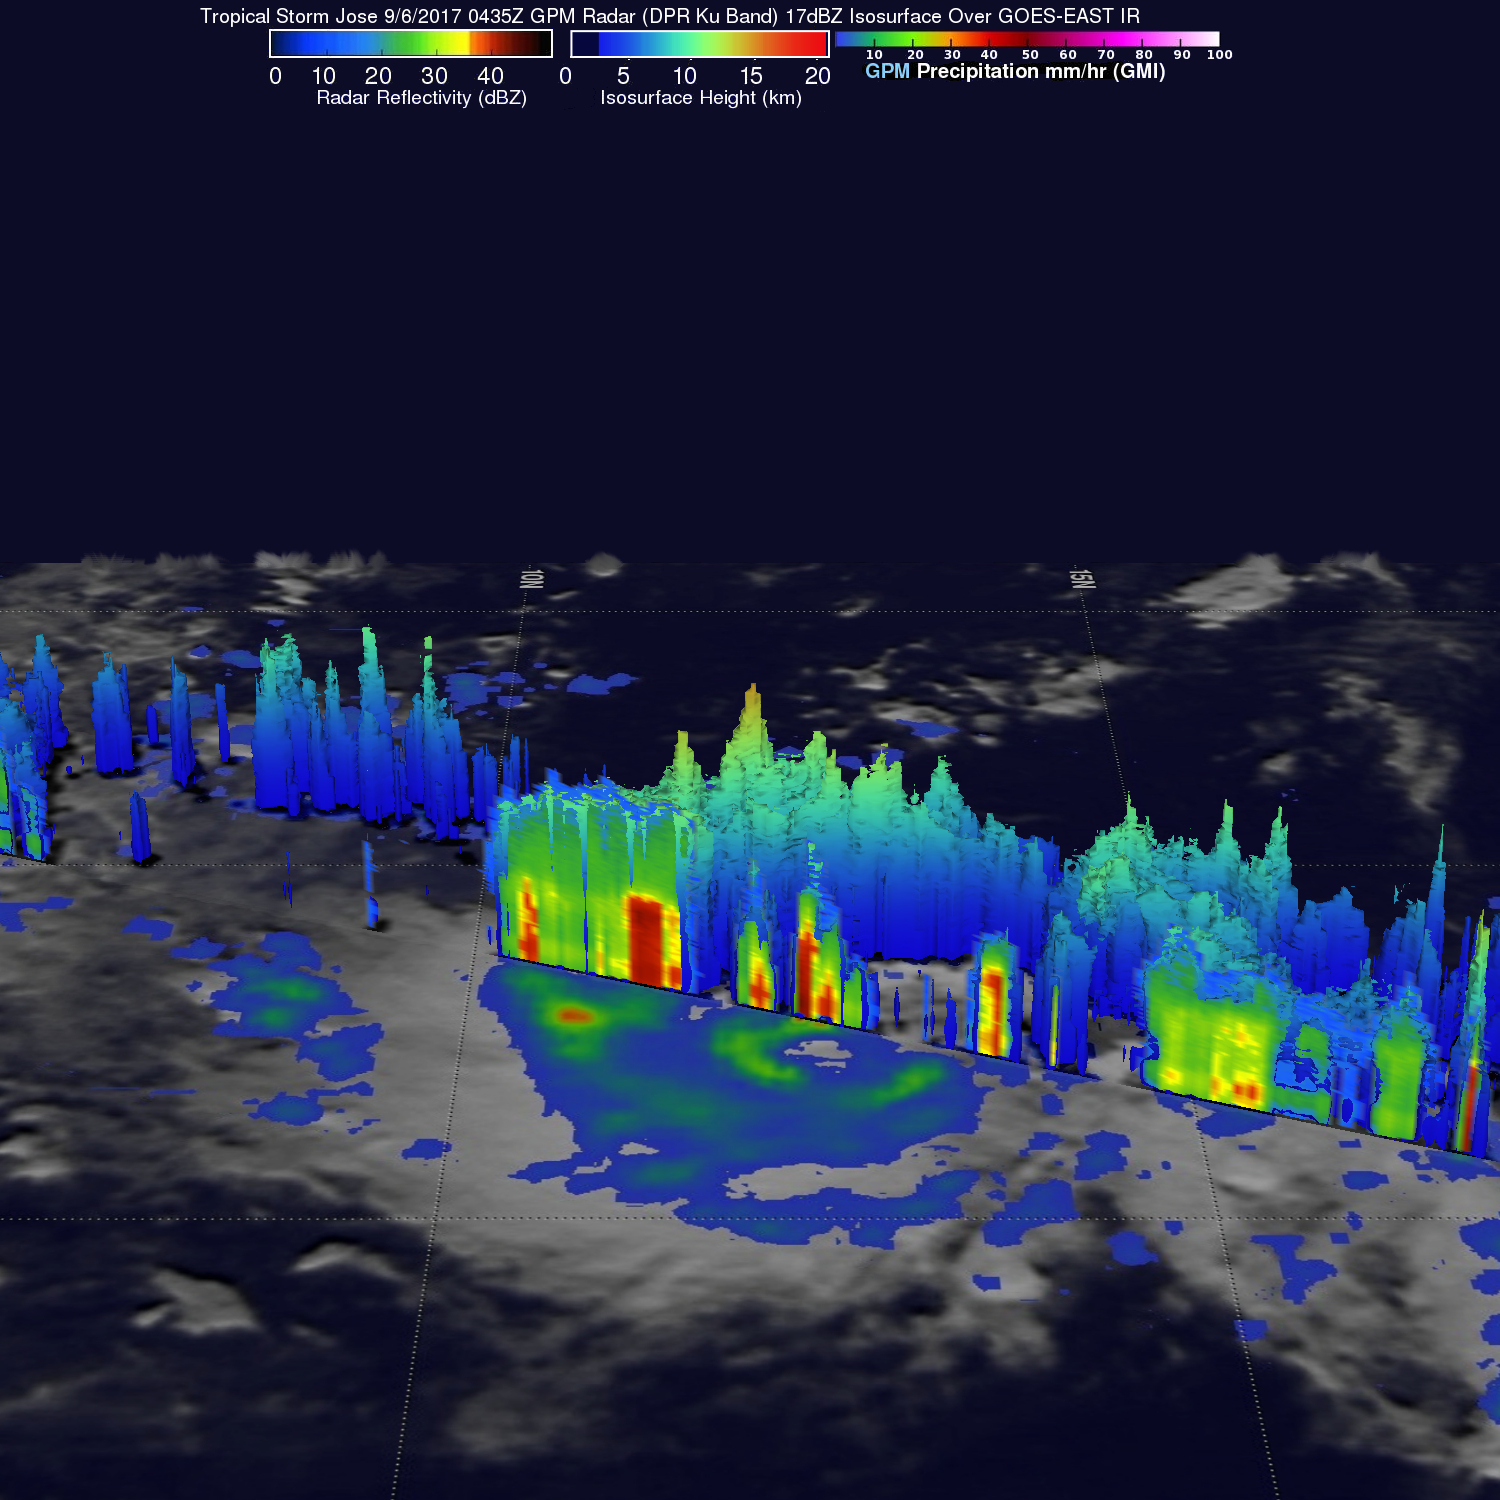 Satellite image of Jose in 3D, with towers of clouds with temperatures in reds, yellows, greens, and blues.